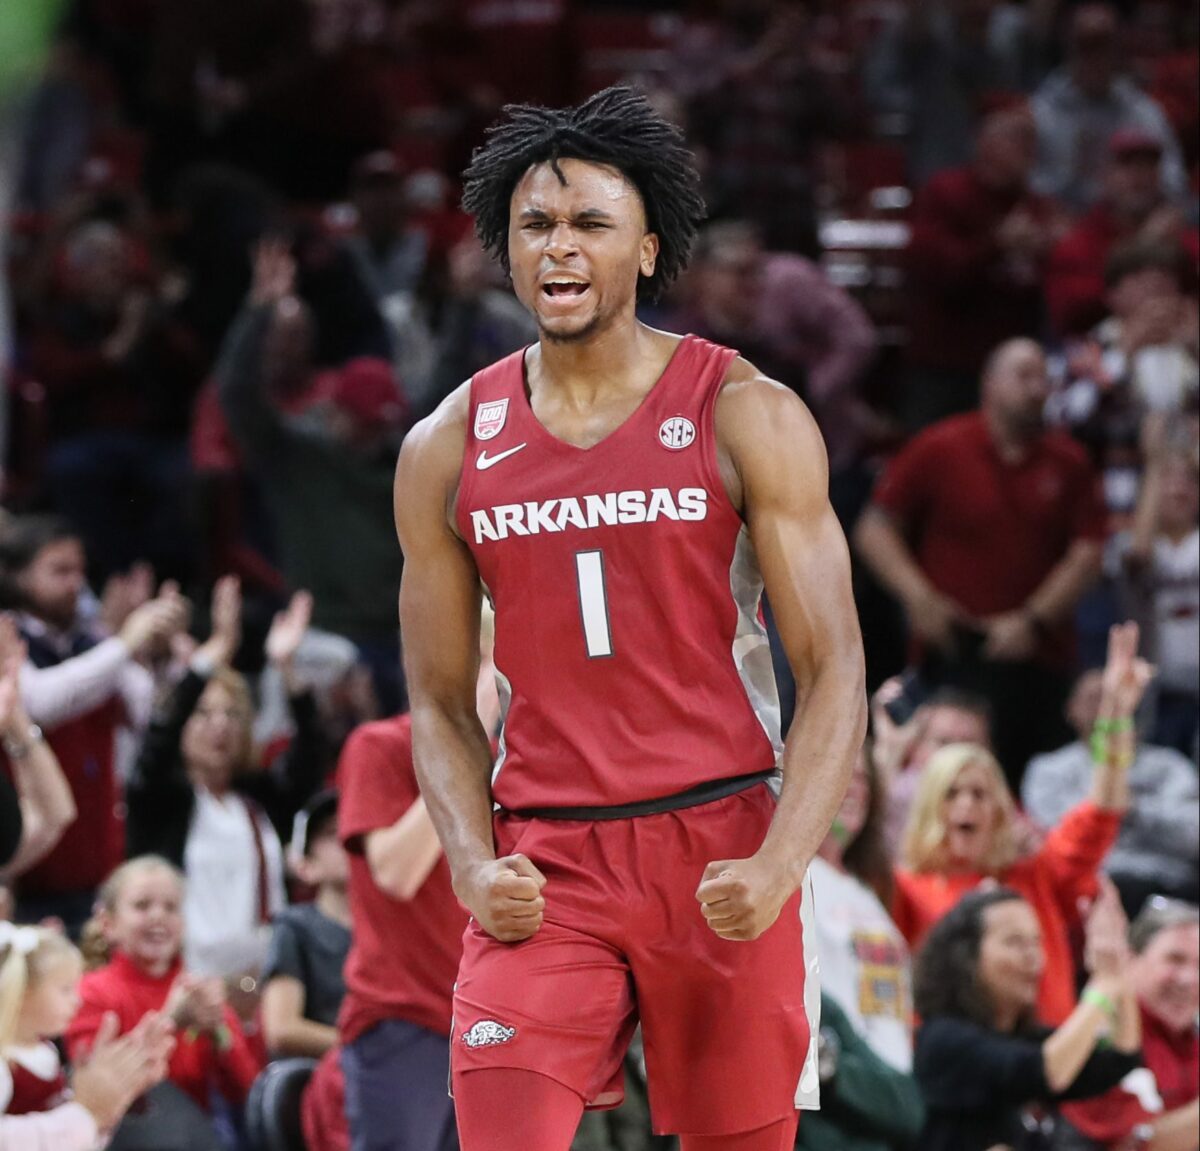 Twitter reacts: Hogs fans, coach thrilled after impressive win over Fordham